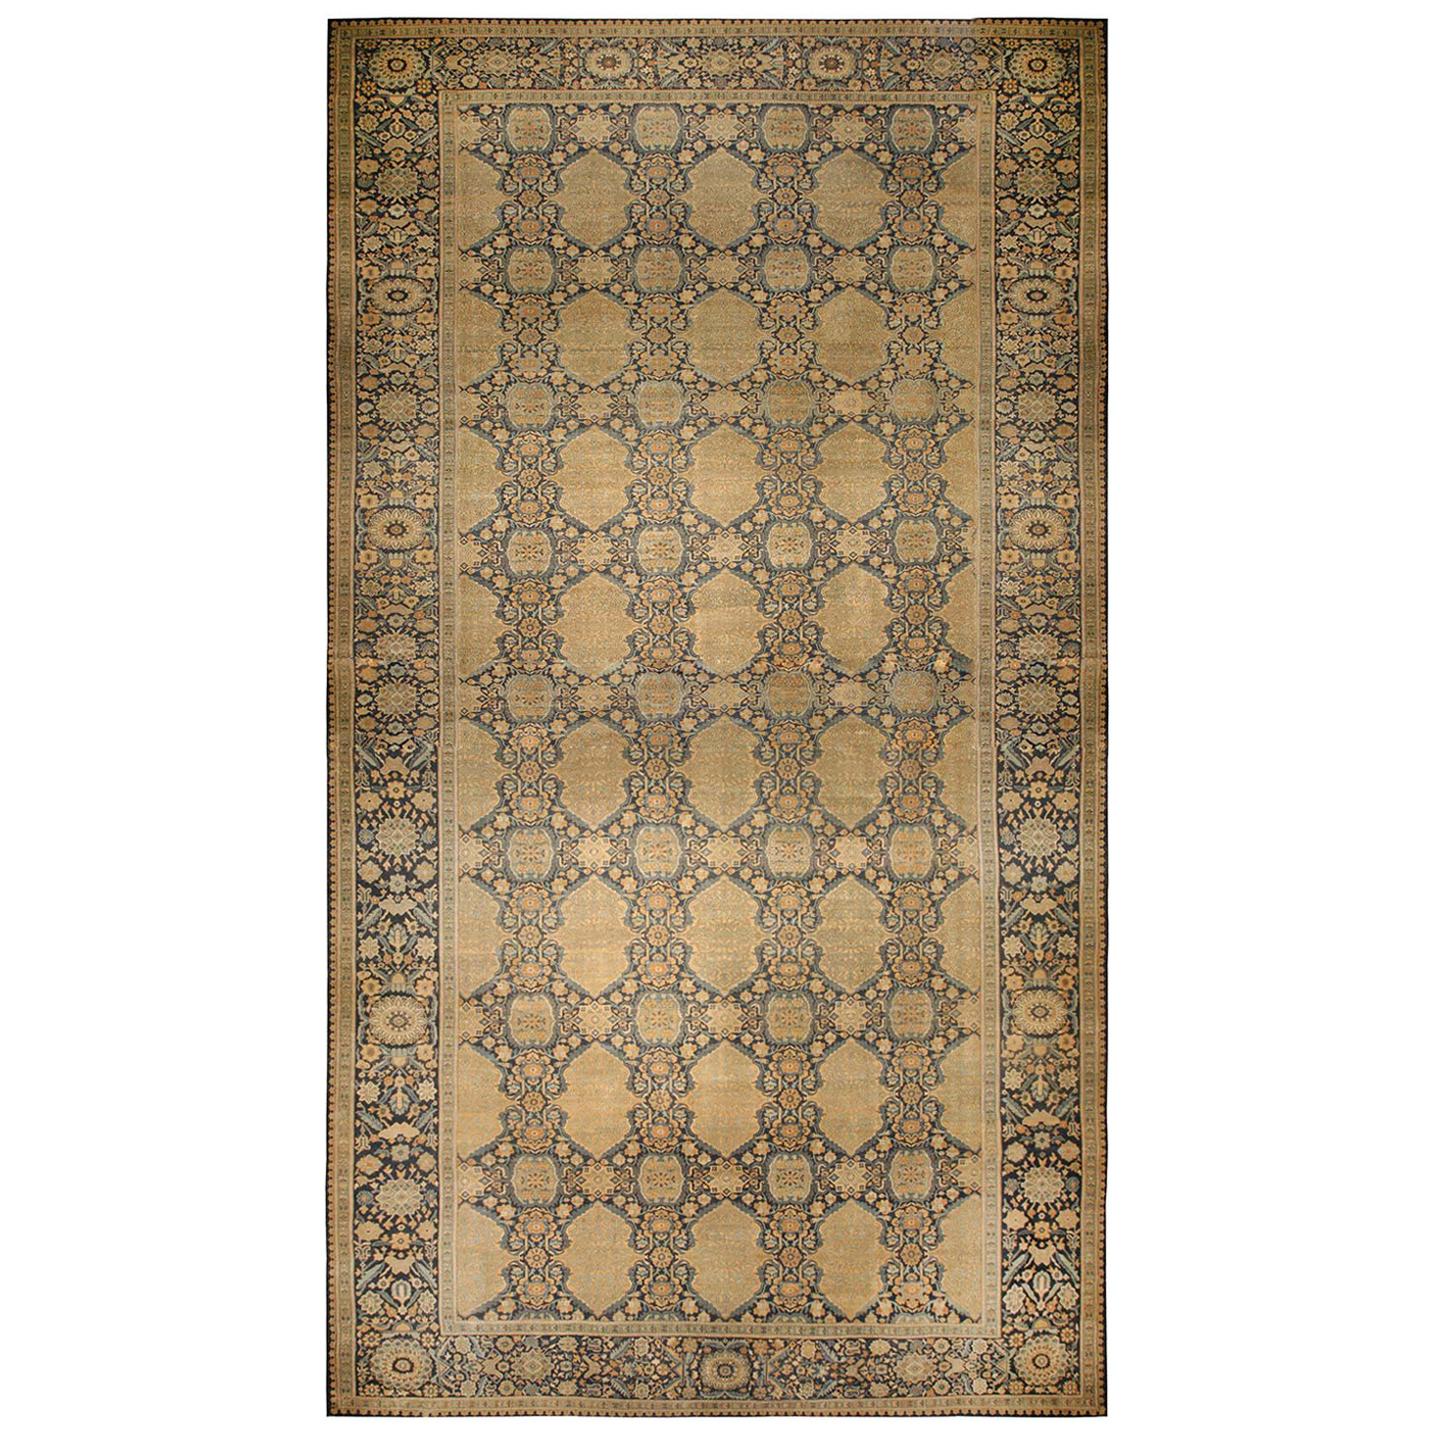 Antique Indian Hand Knotted Wool Rug Size Adjusted For Sale